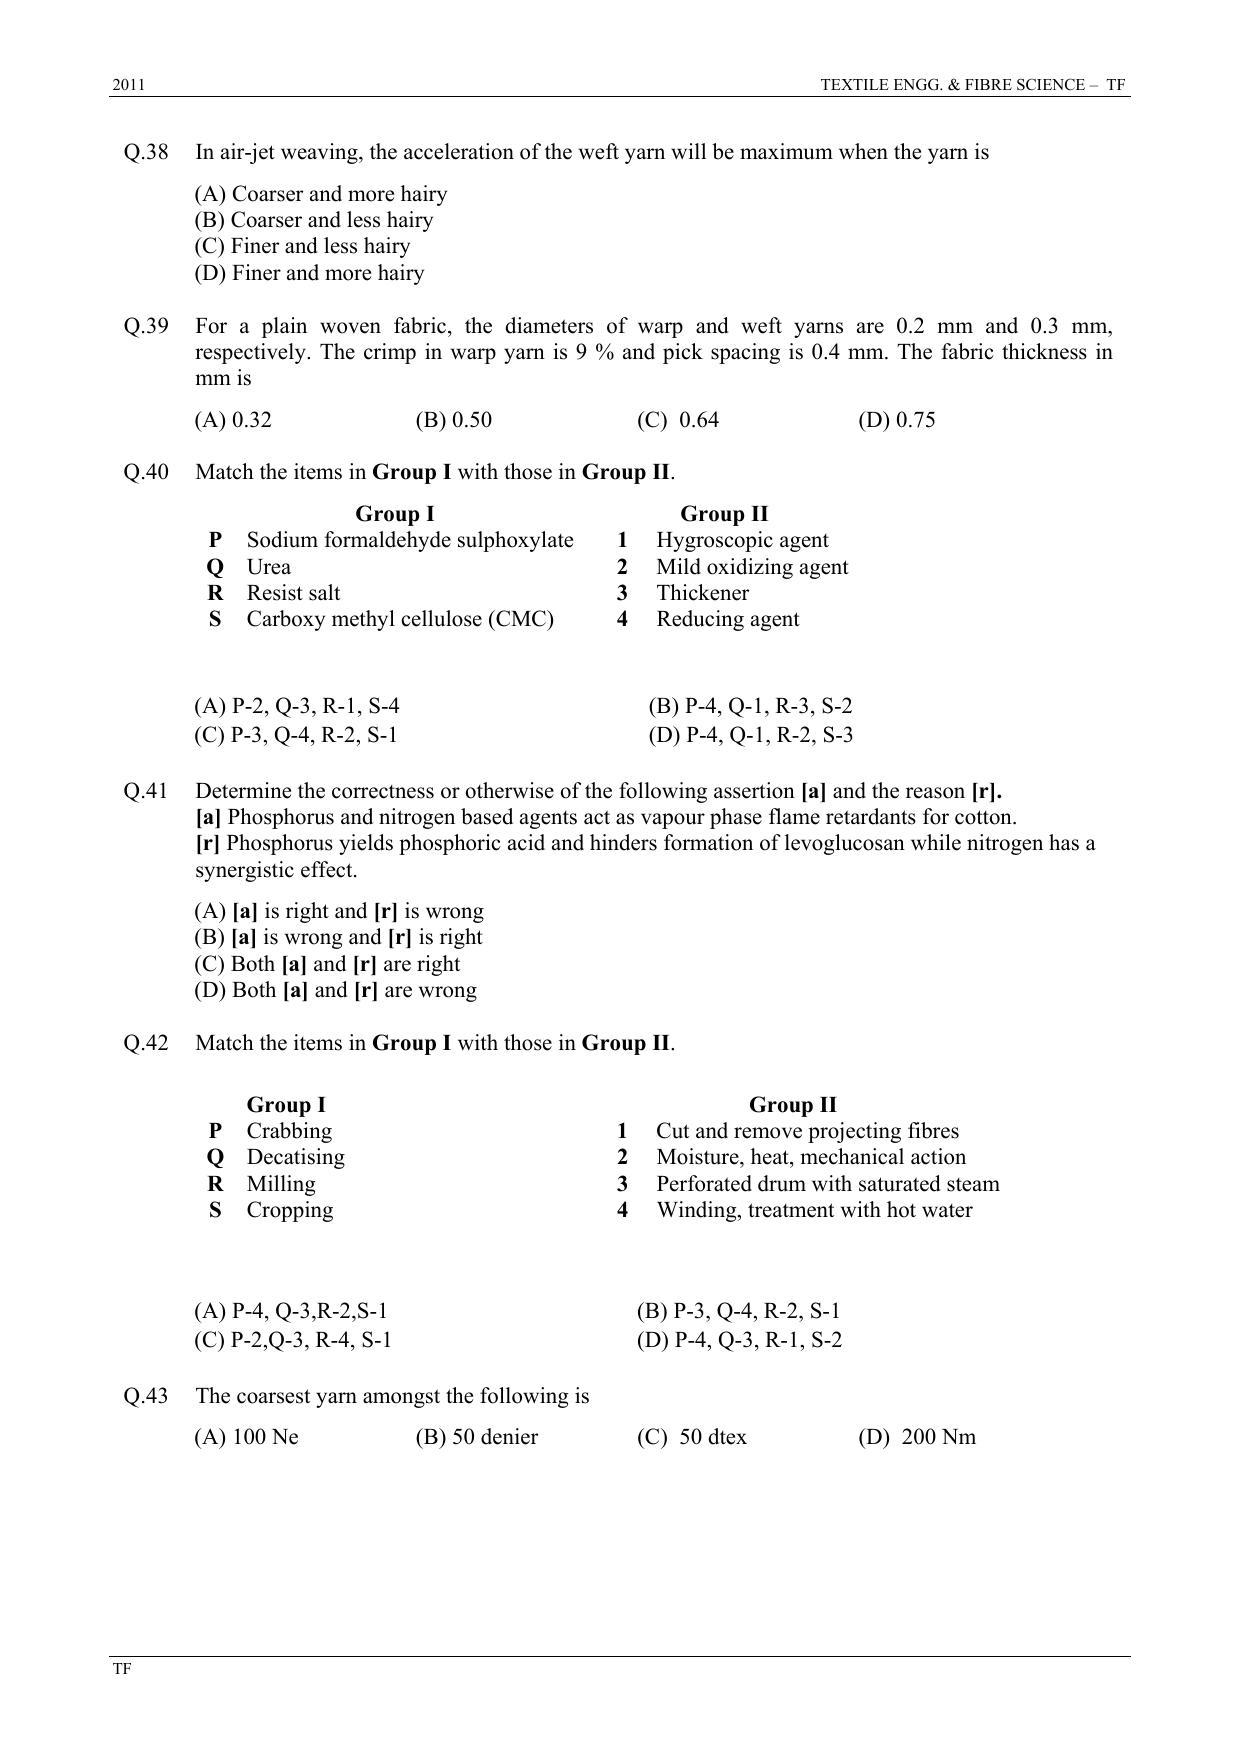 GATE 2011 Textile Engineering and Fibre Science (TF) Question Paper with Answer Key - Page 7